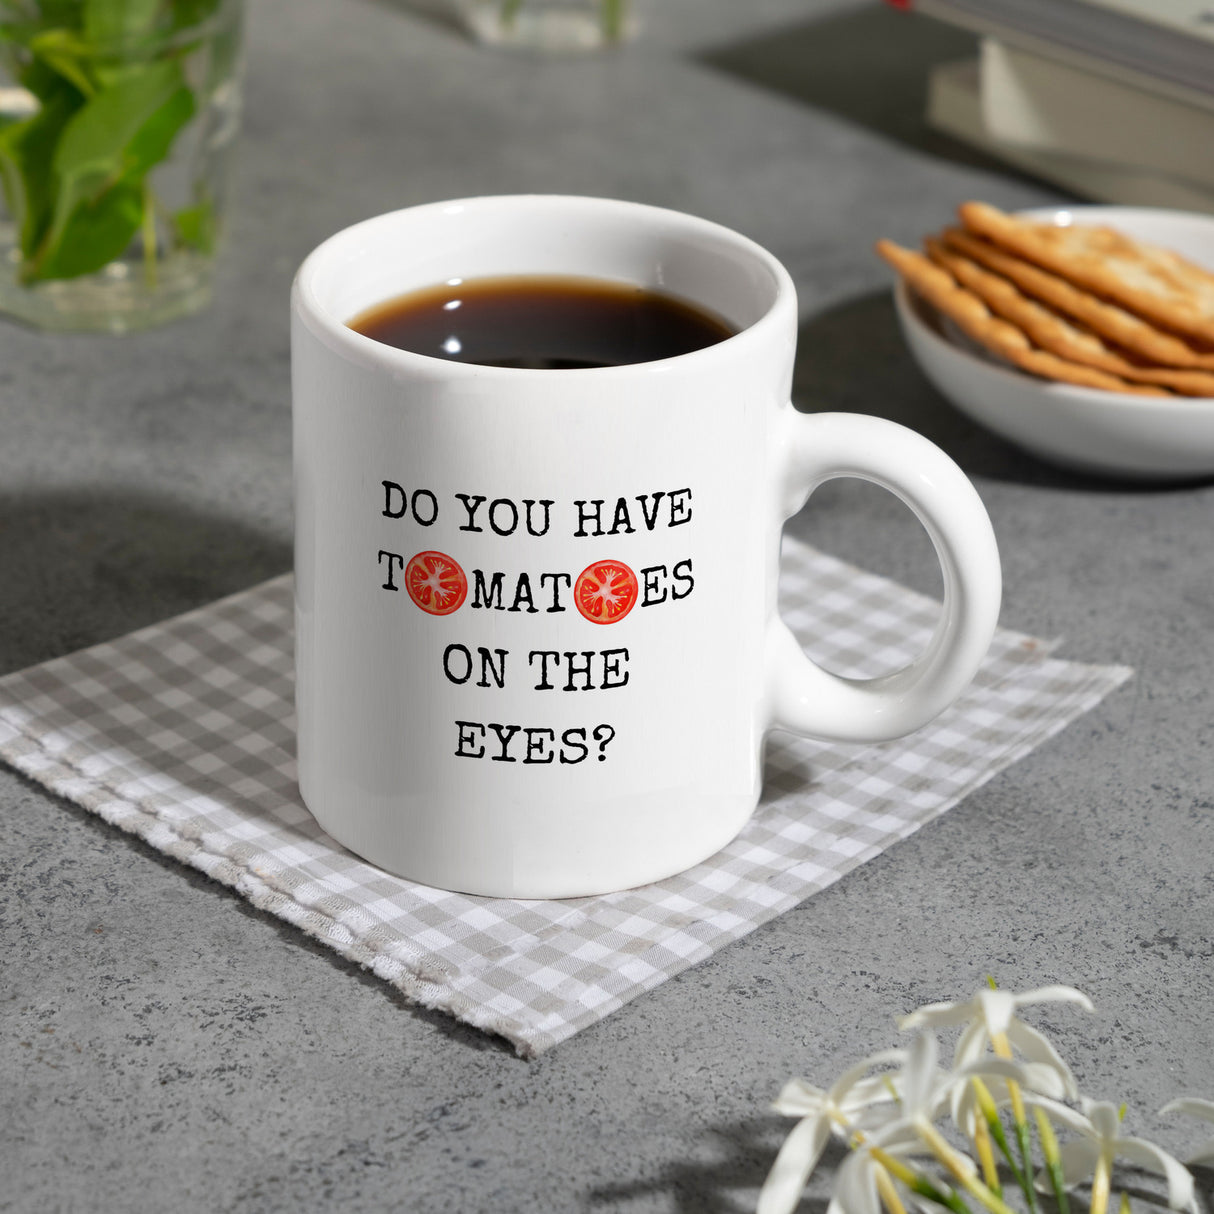 Denglisch Kaffeebecher mit Spruch - Do you have tomatoes on the eyes